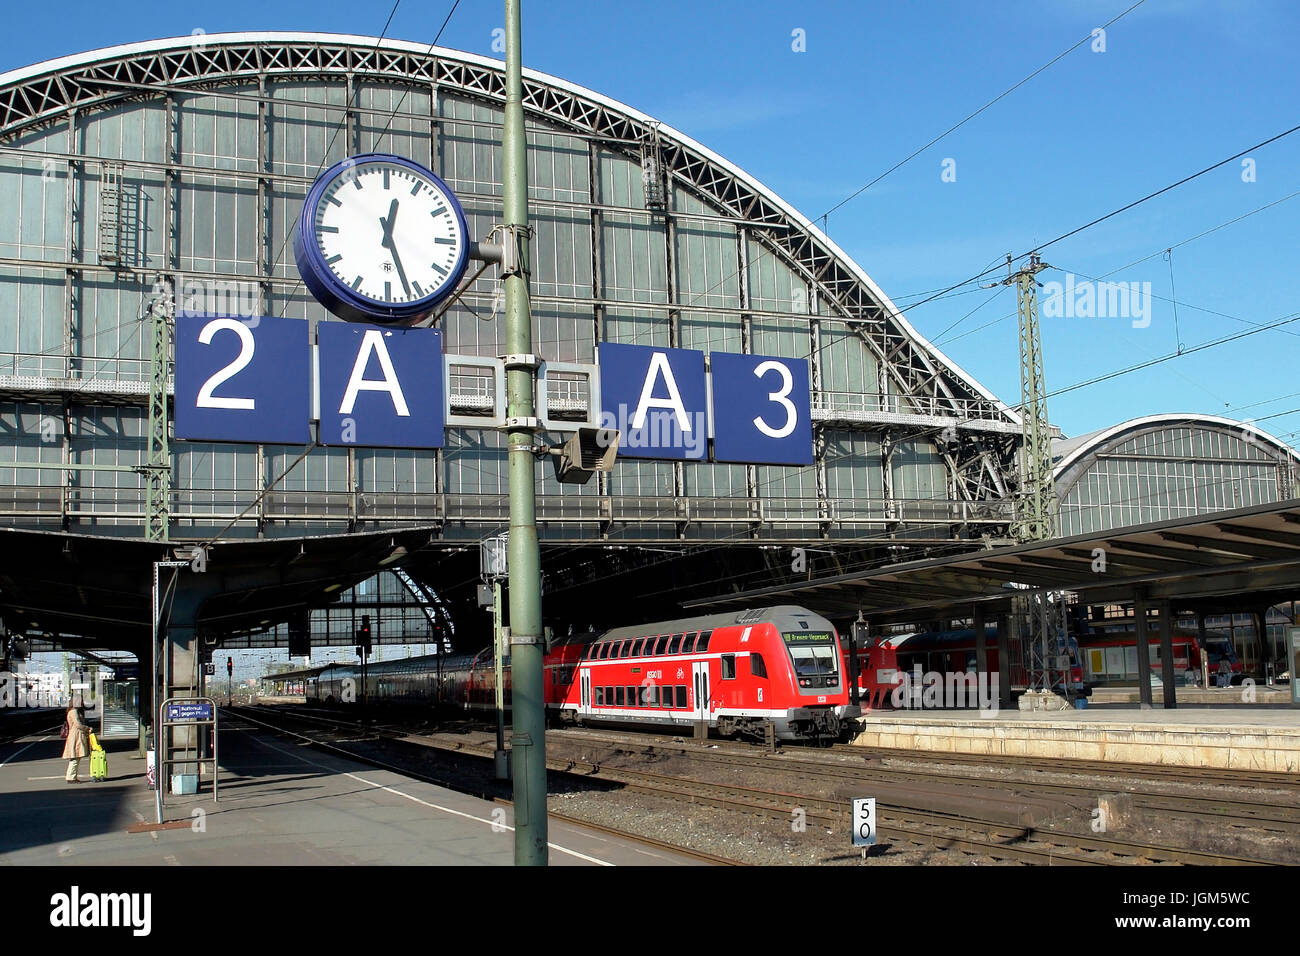 Europe, Germany, Bremen, central station, railway station, train, transport, traffic, building, building, rail, railway tracks, outside, outdoors, day Stock Photo